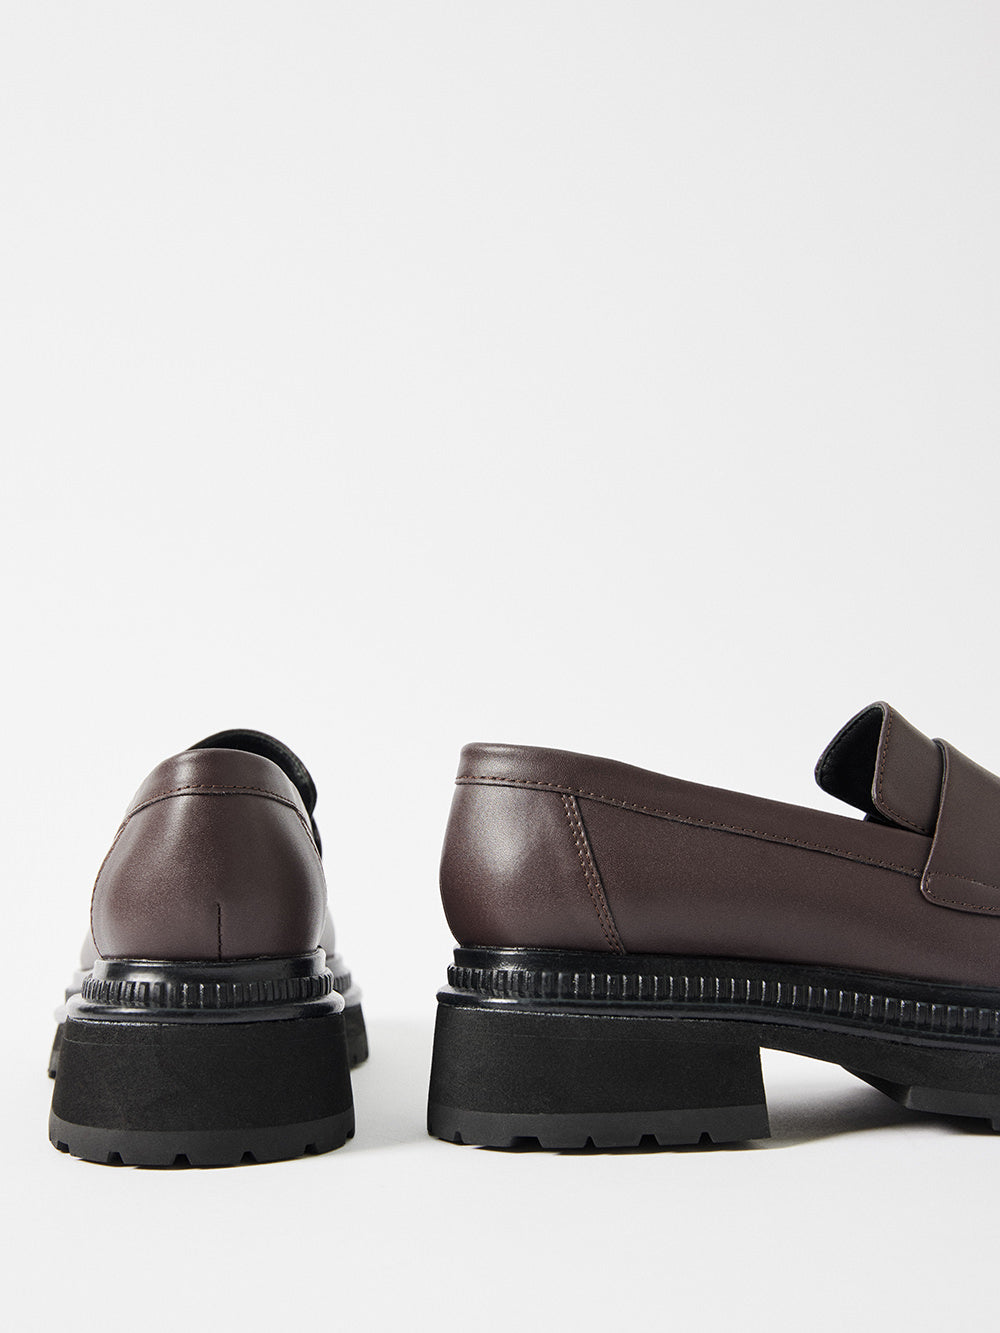 The Becca Leather Loafer